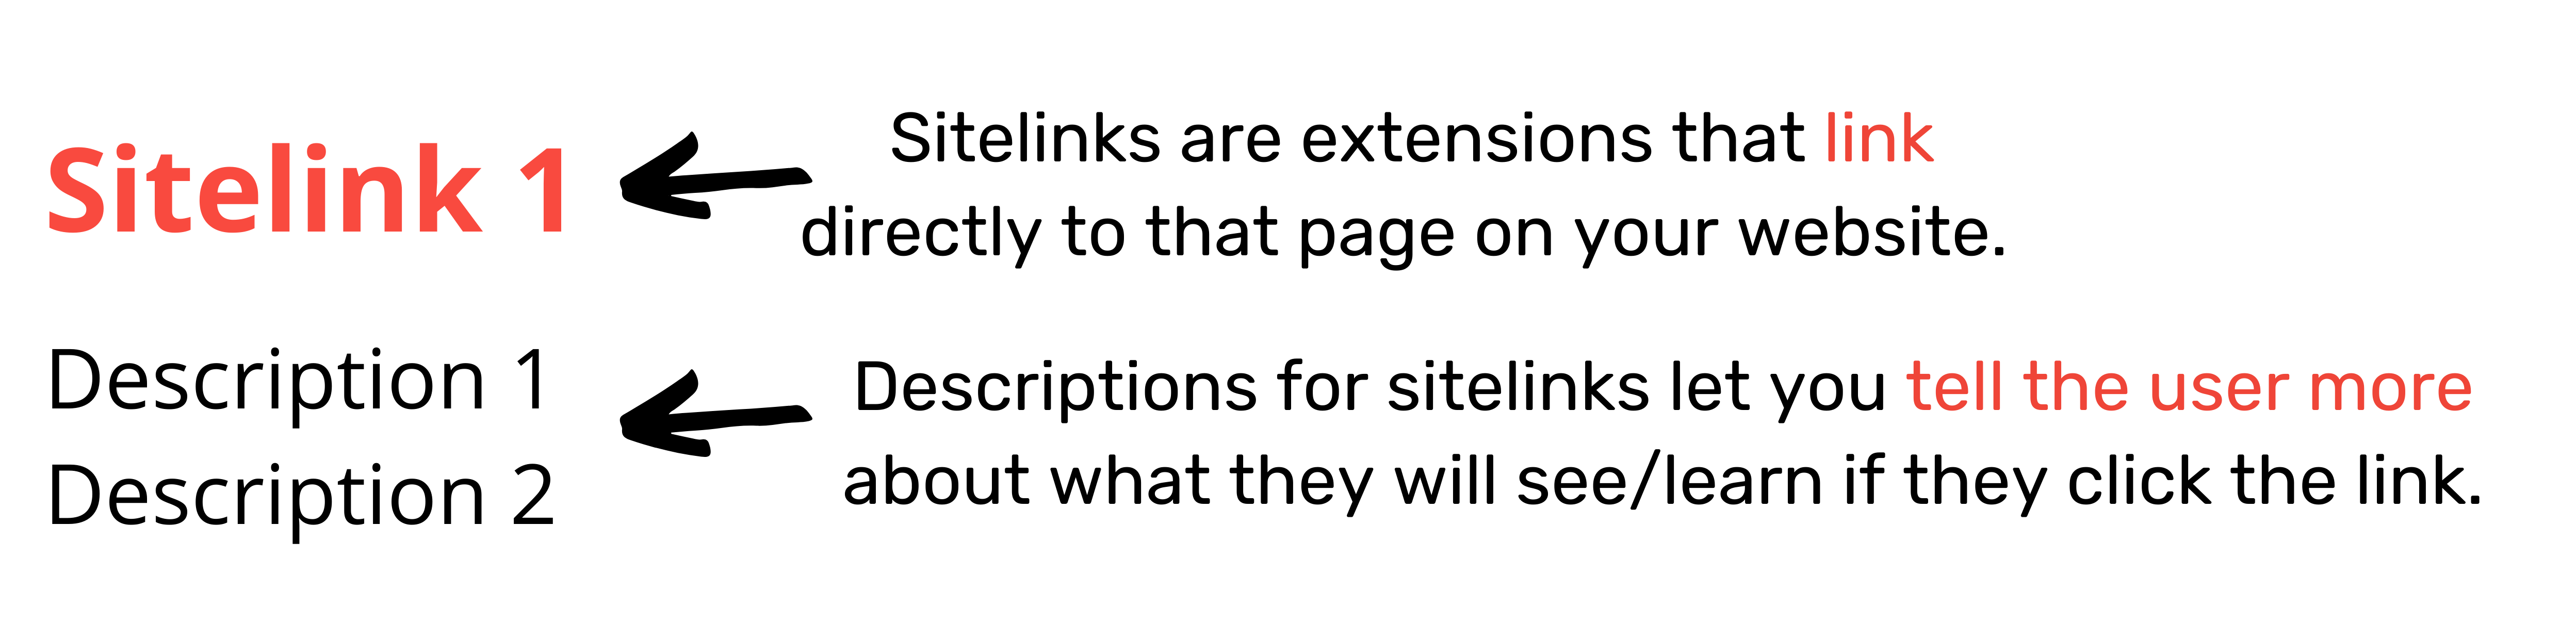 a diagram showing sitelinks in an ad and what they are